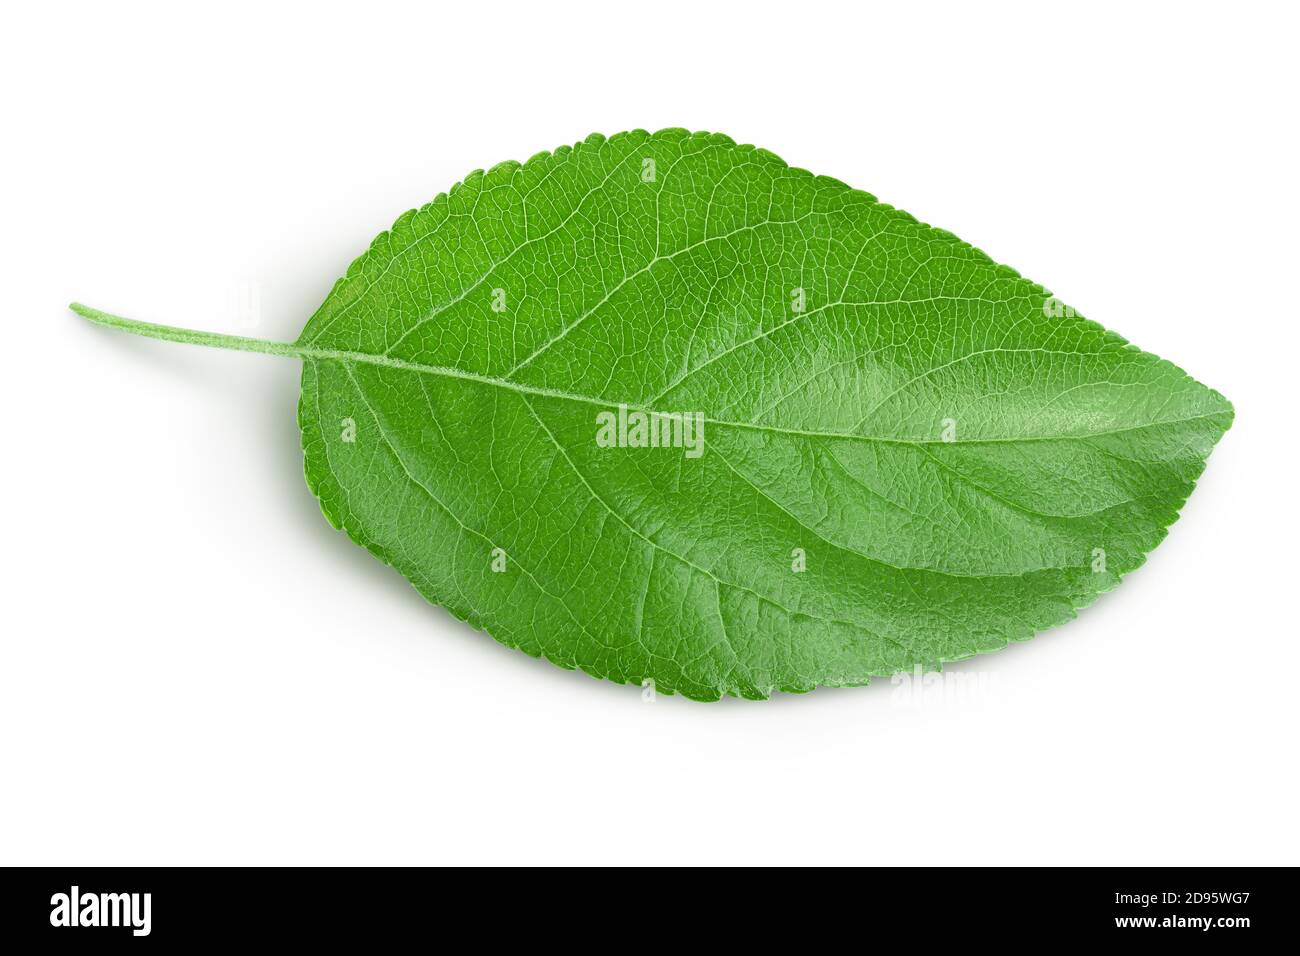 Apple leaf isolated on white background with clipping path. Stock Photo